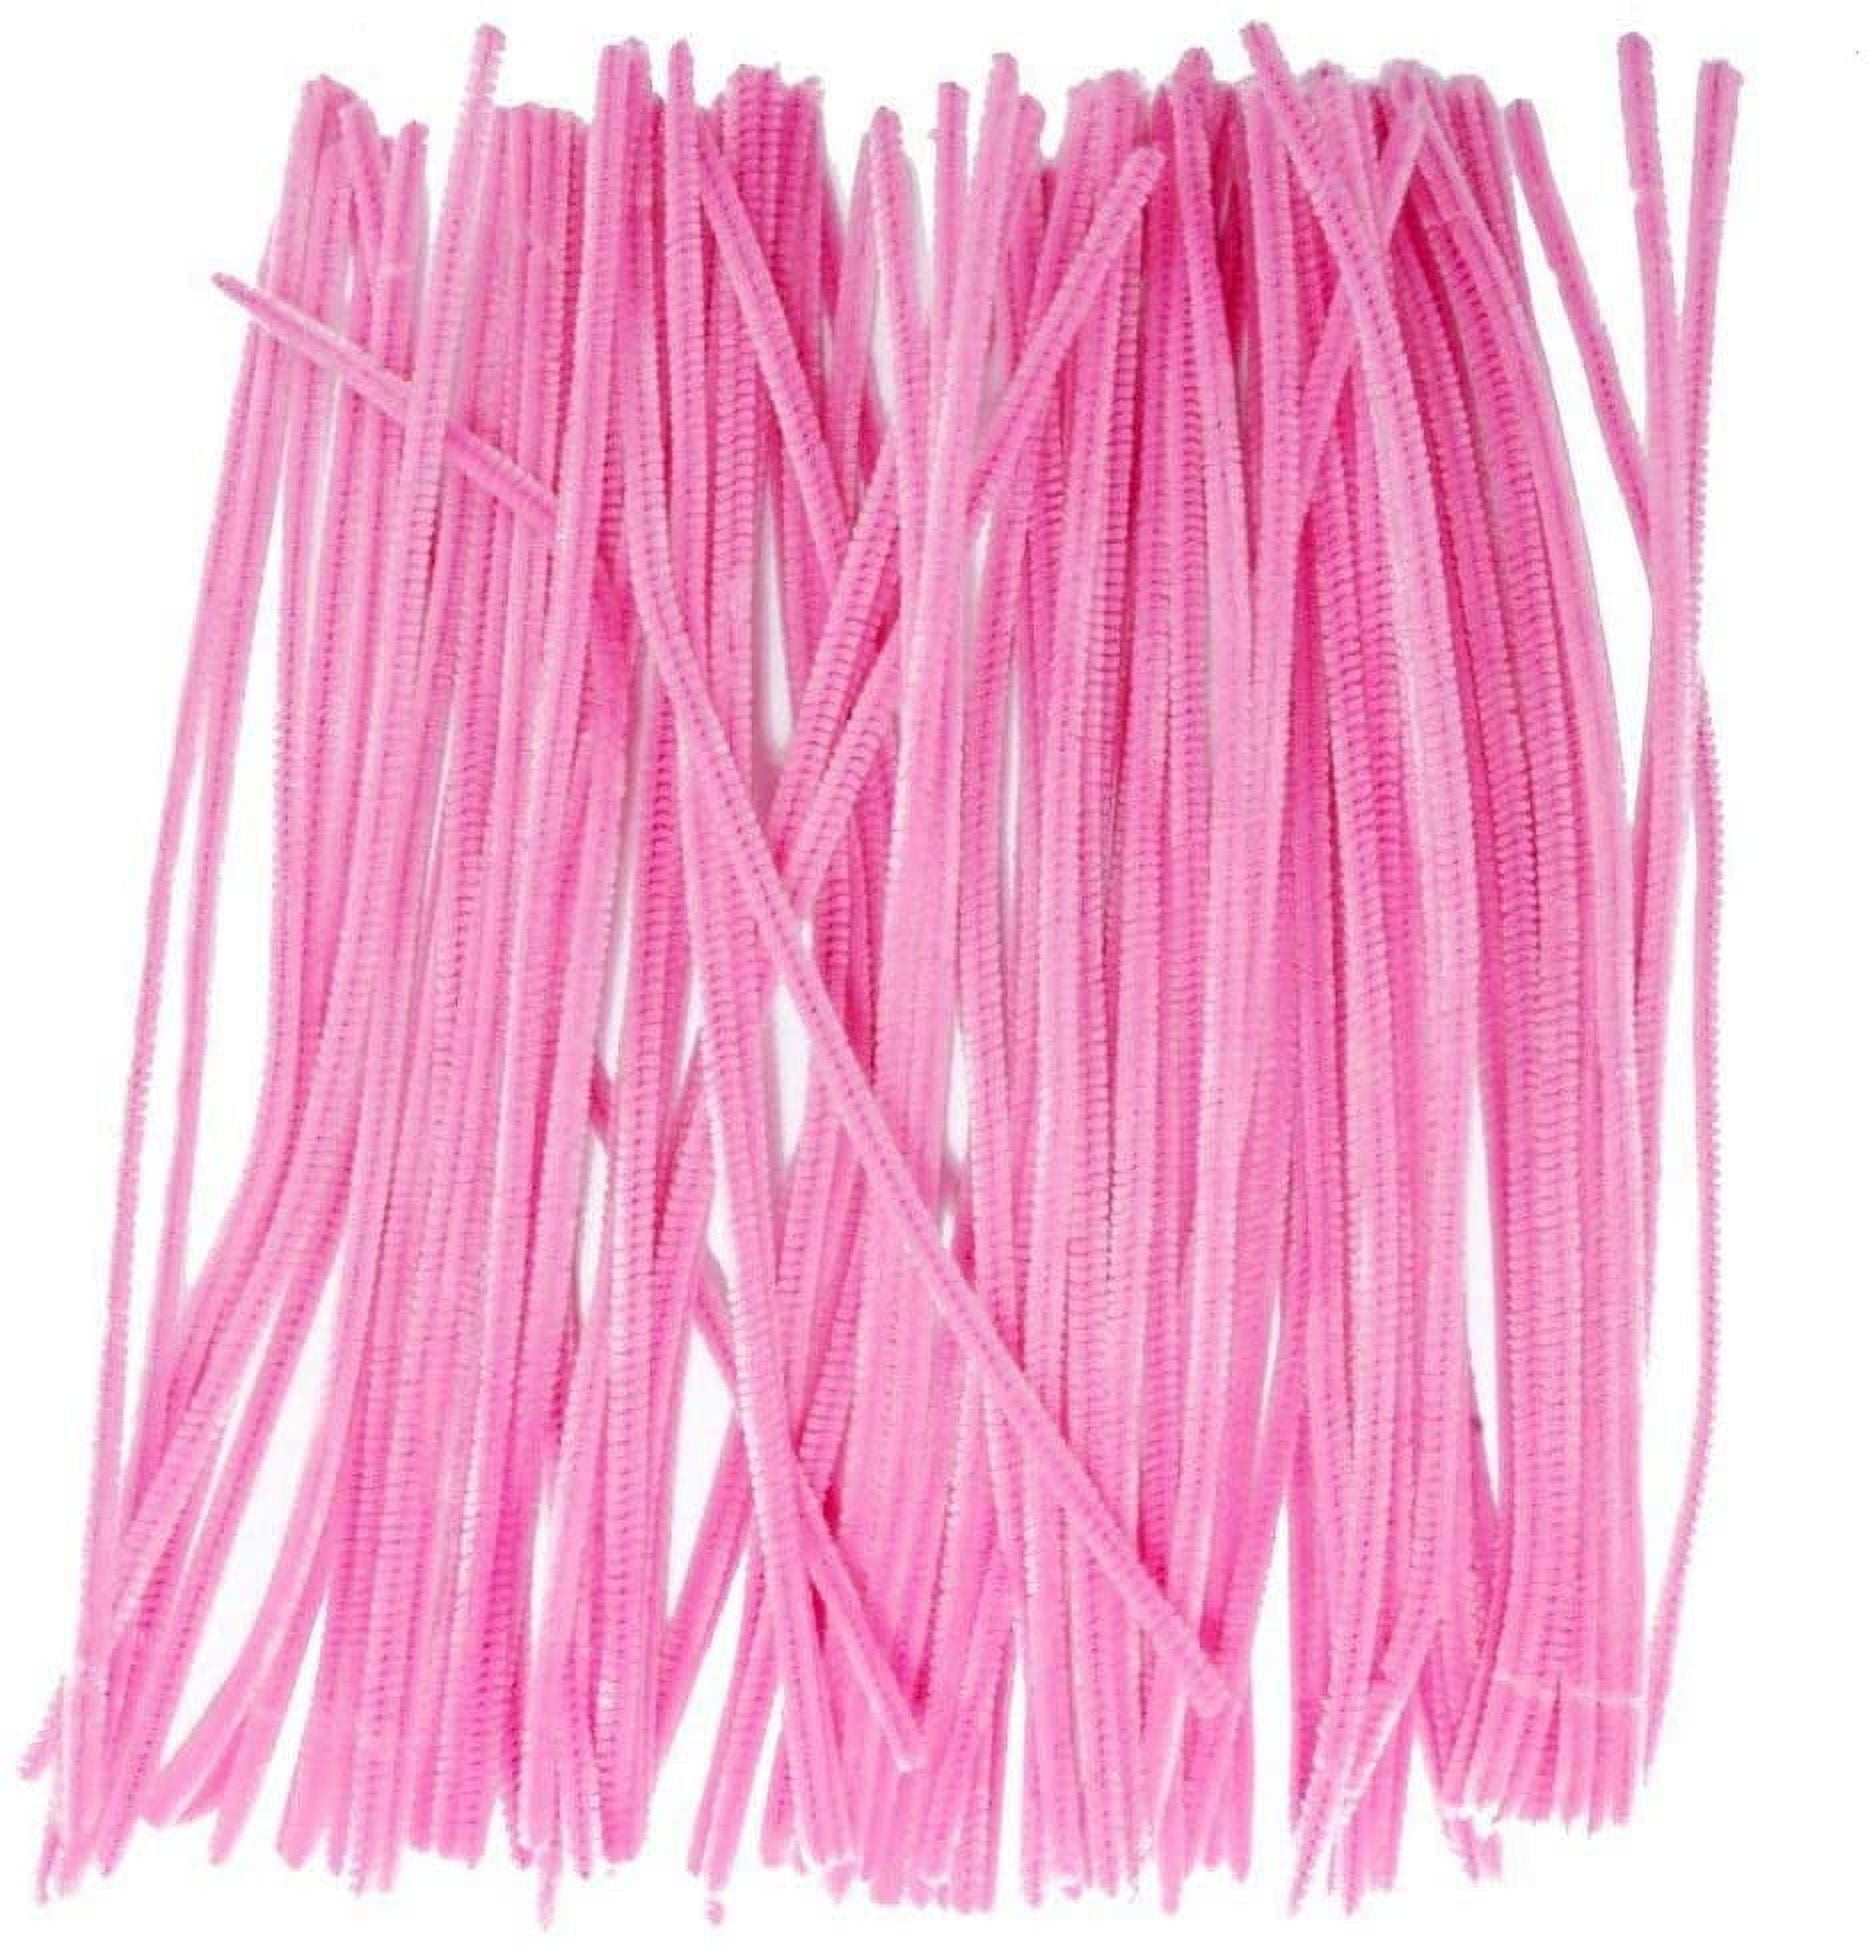 YOKIVE 100 Pcs Pipe Cleaners, Chenille Stems Decoration, Great for DIY Art  Craft Supplies (6mm 12 Inch Pink)